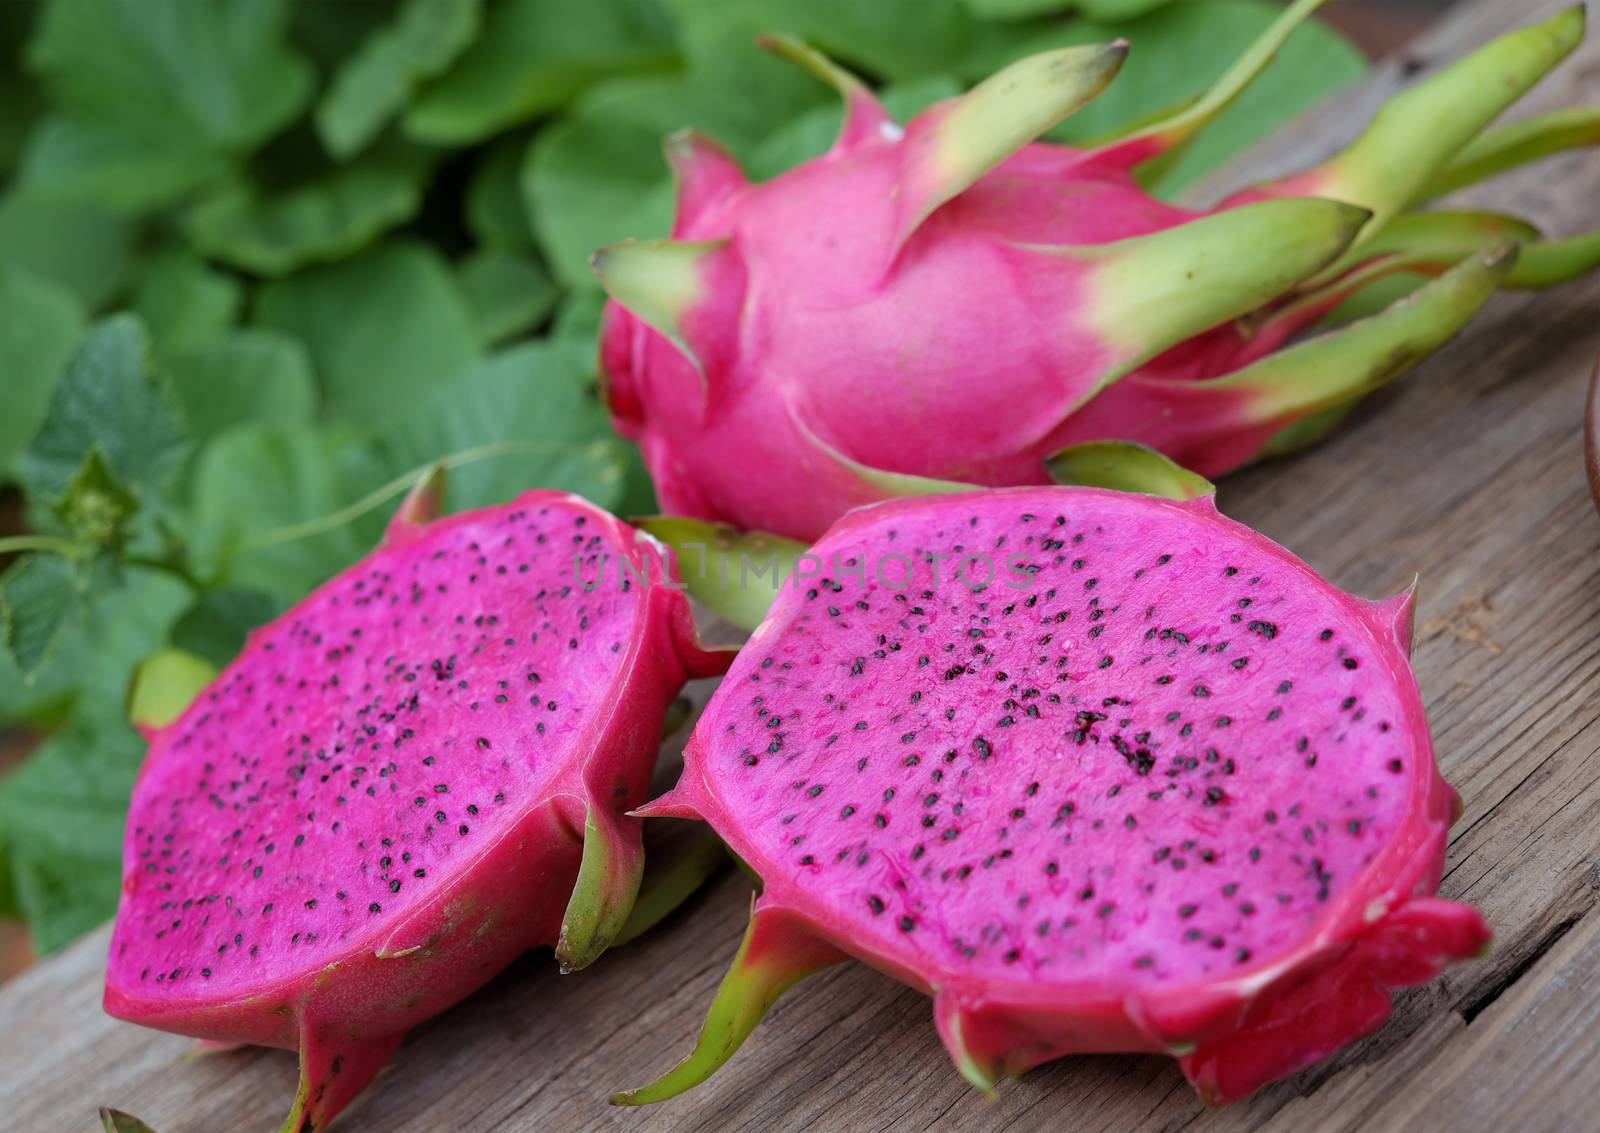 dragon fruit, tropical fruits, Vietnam agriculture by xuanhuongho